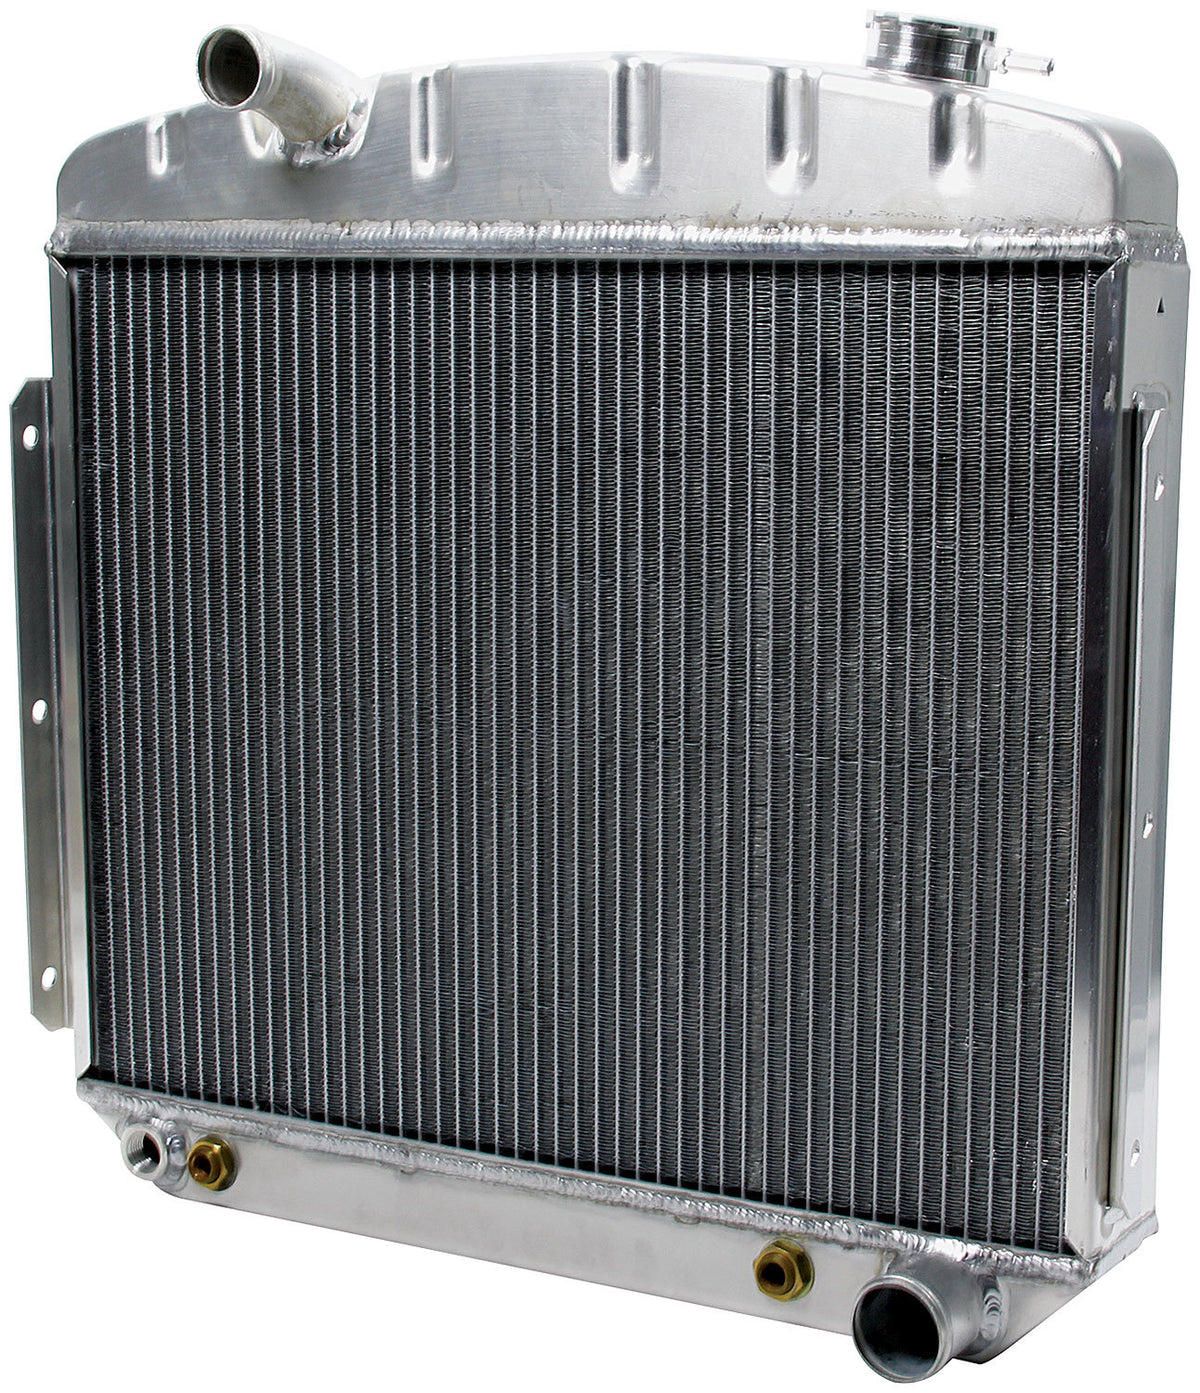 Radiator 1957 Chevy 6cyl w/ Trans Cooler